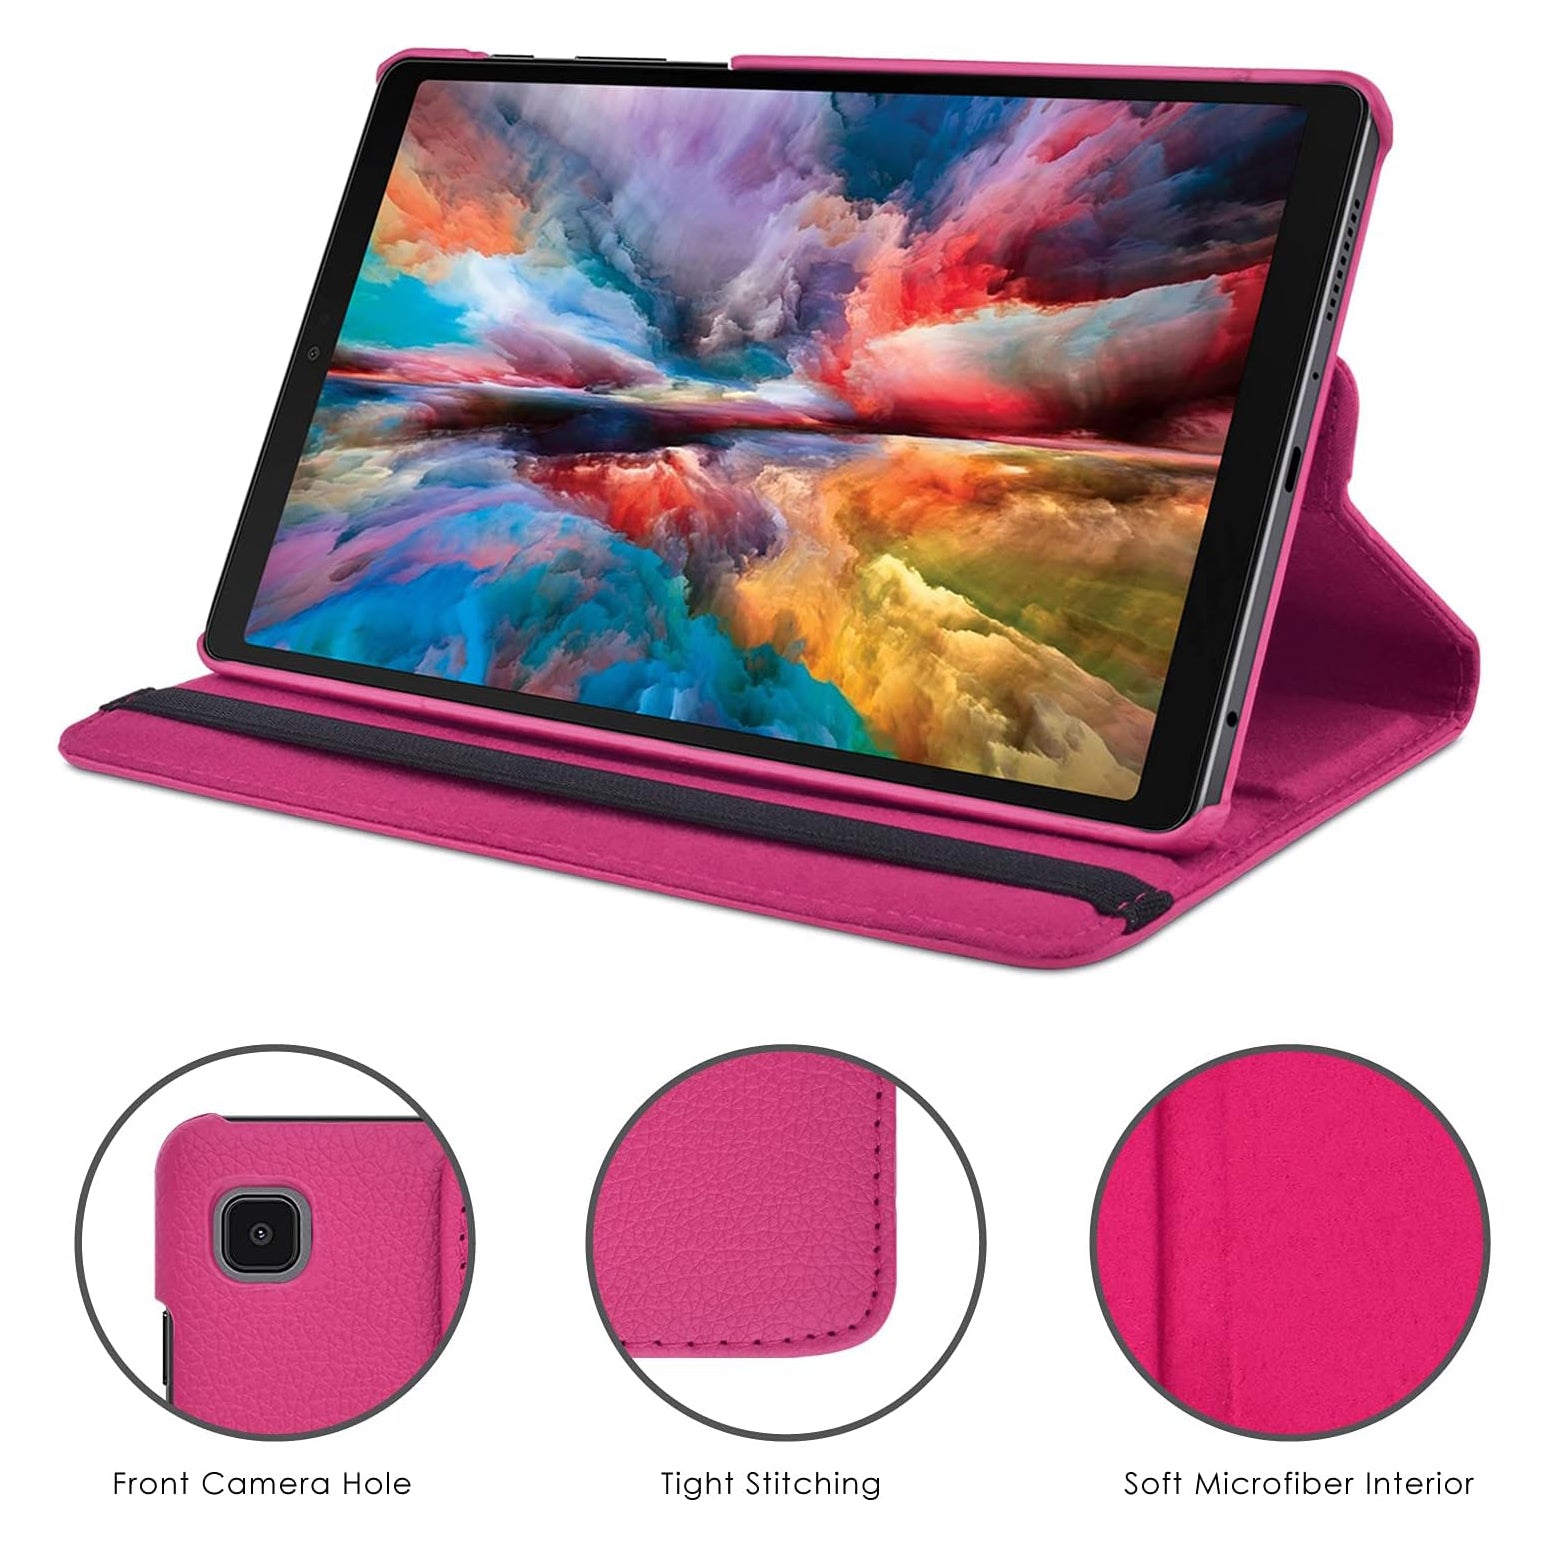 For Samsung Galaxy Tab A7 Lite Tablet Case 360° Rotating PU Leather Cover - Rose